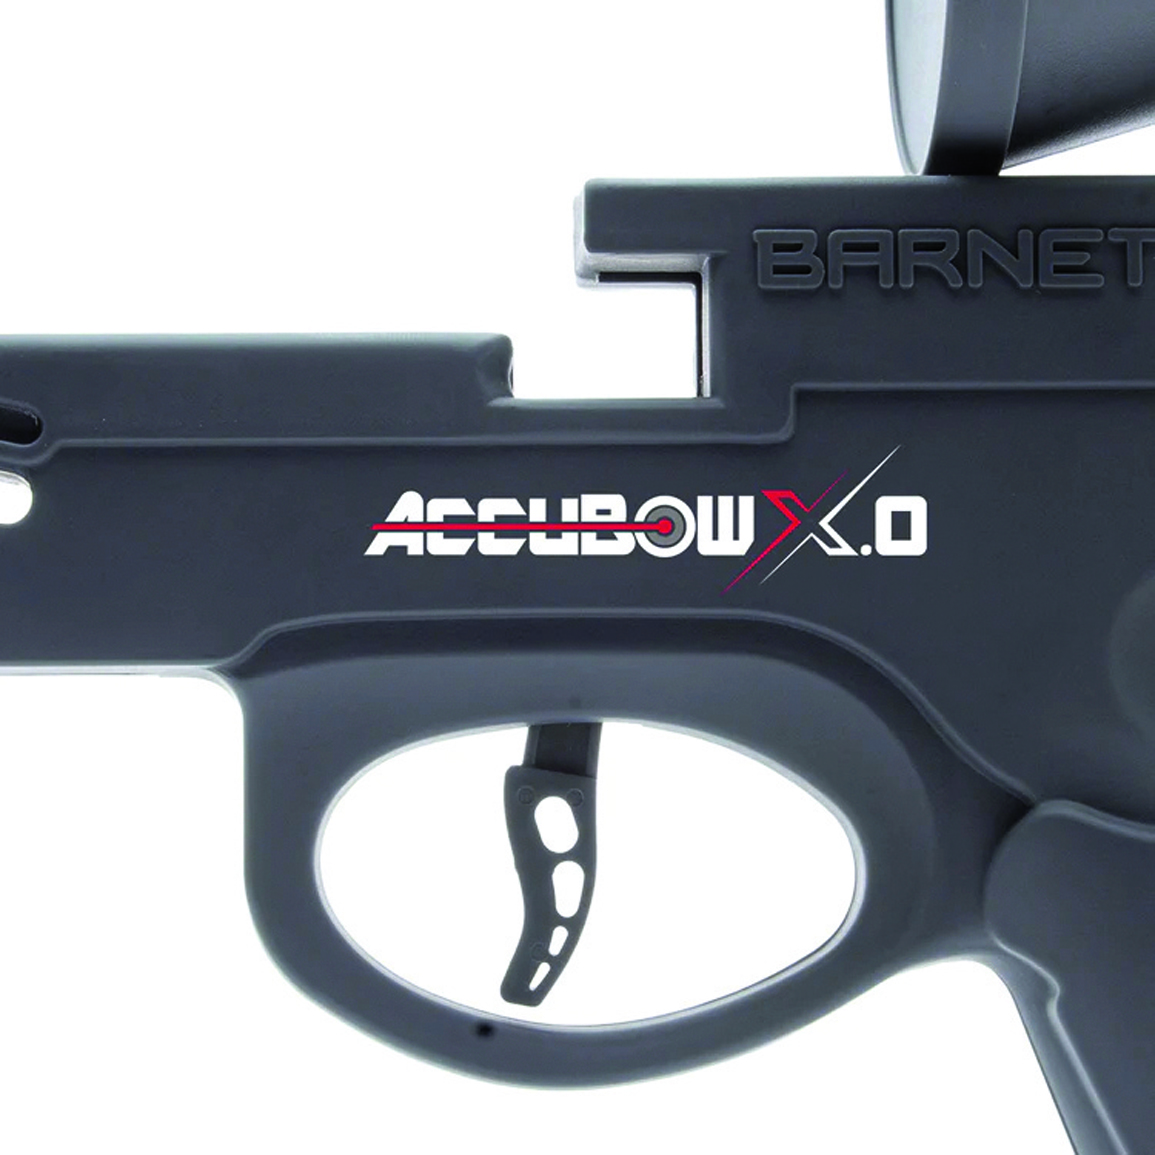 AccuBow X.0 Crossbow Trainer